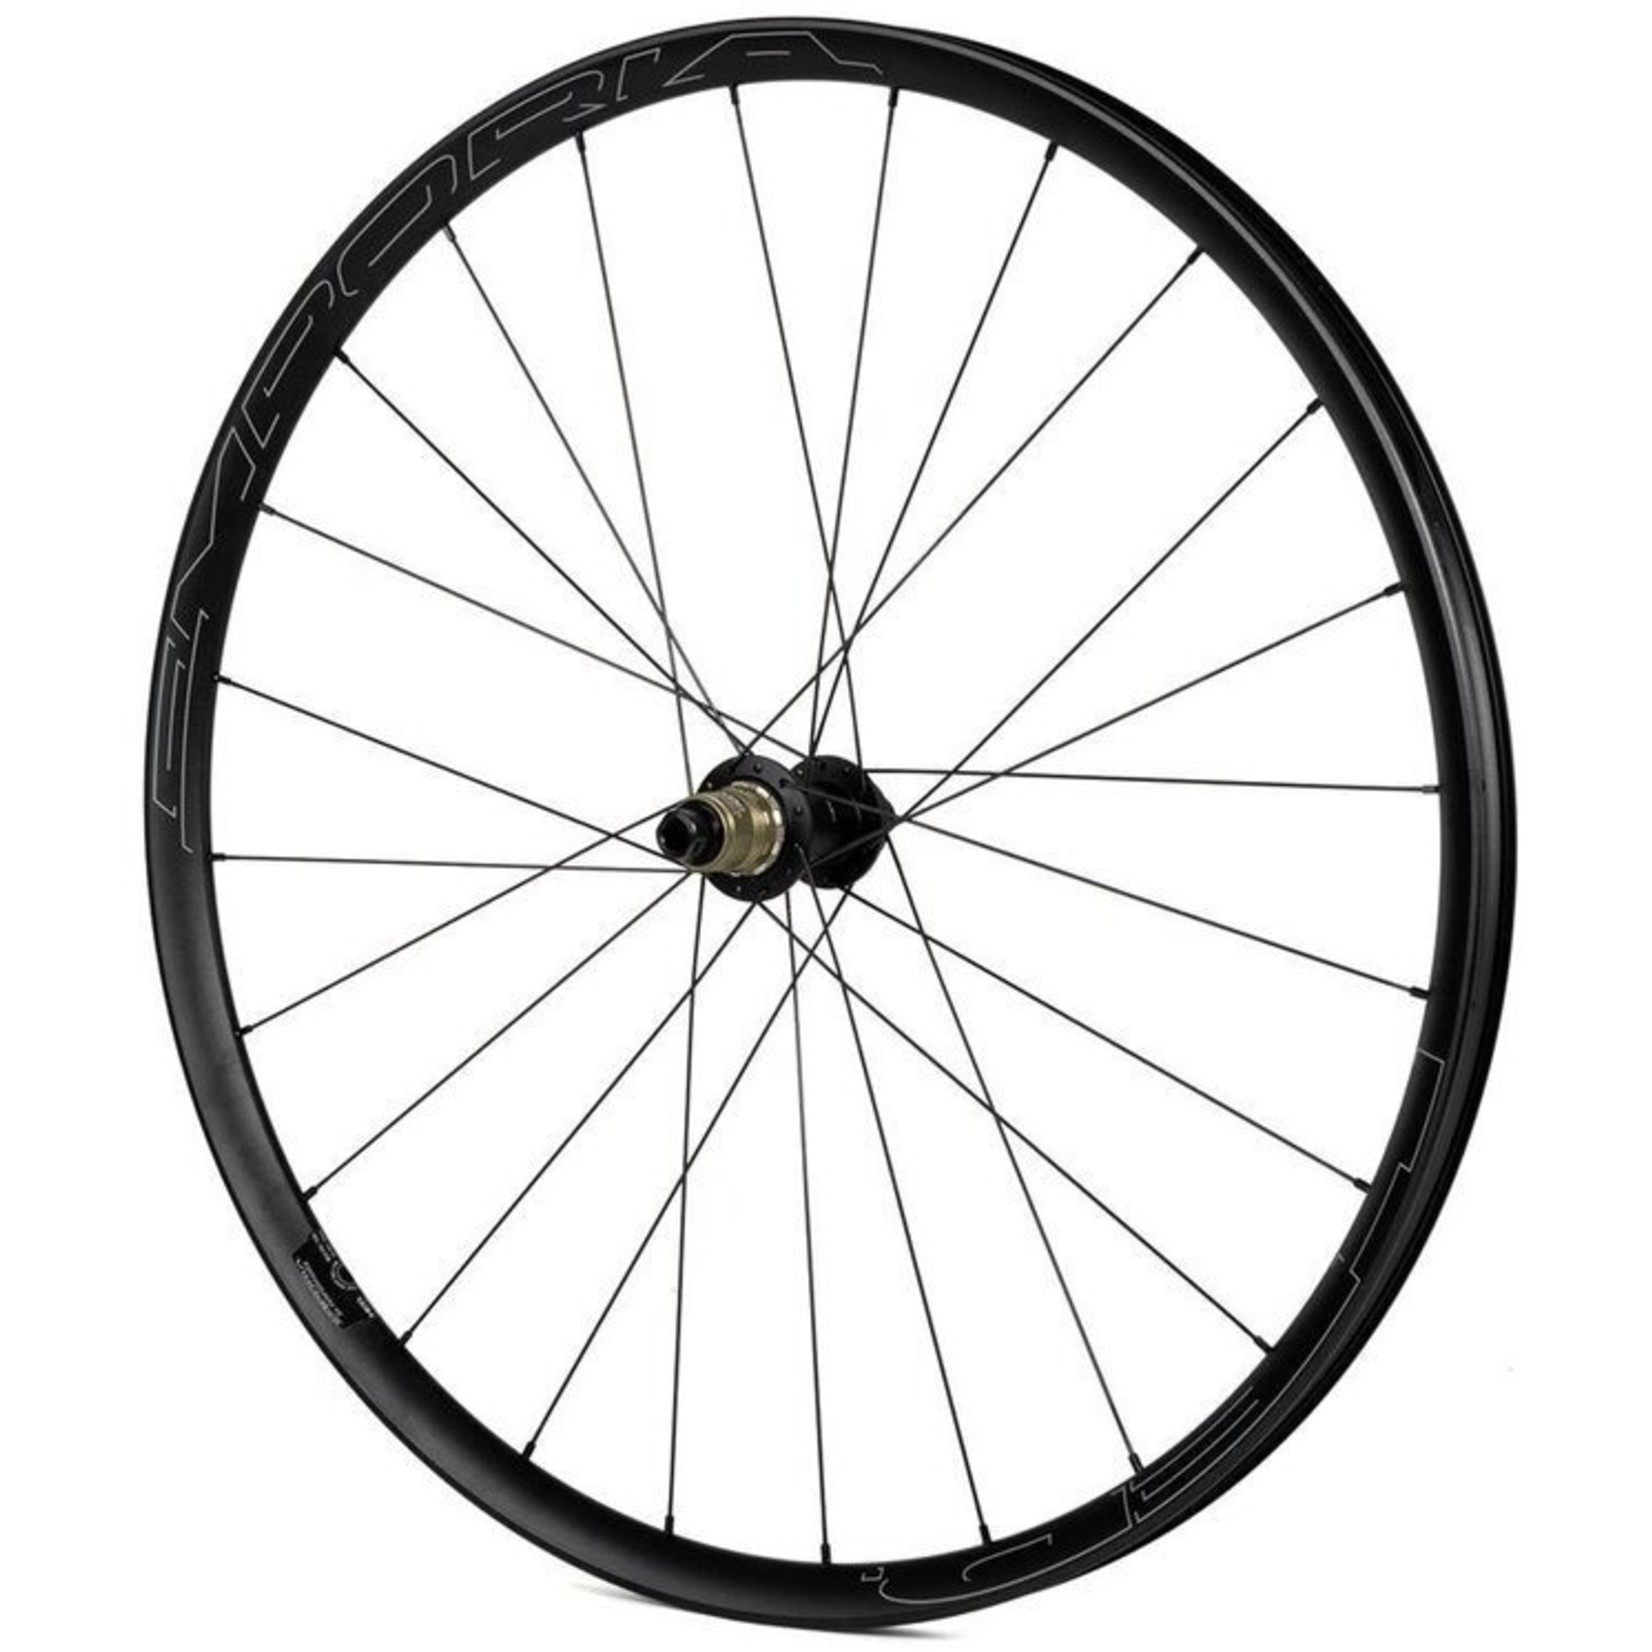 Hed HED Emporia GA Performace 700c Disc Wheelset XDR 12/142 12/100